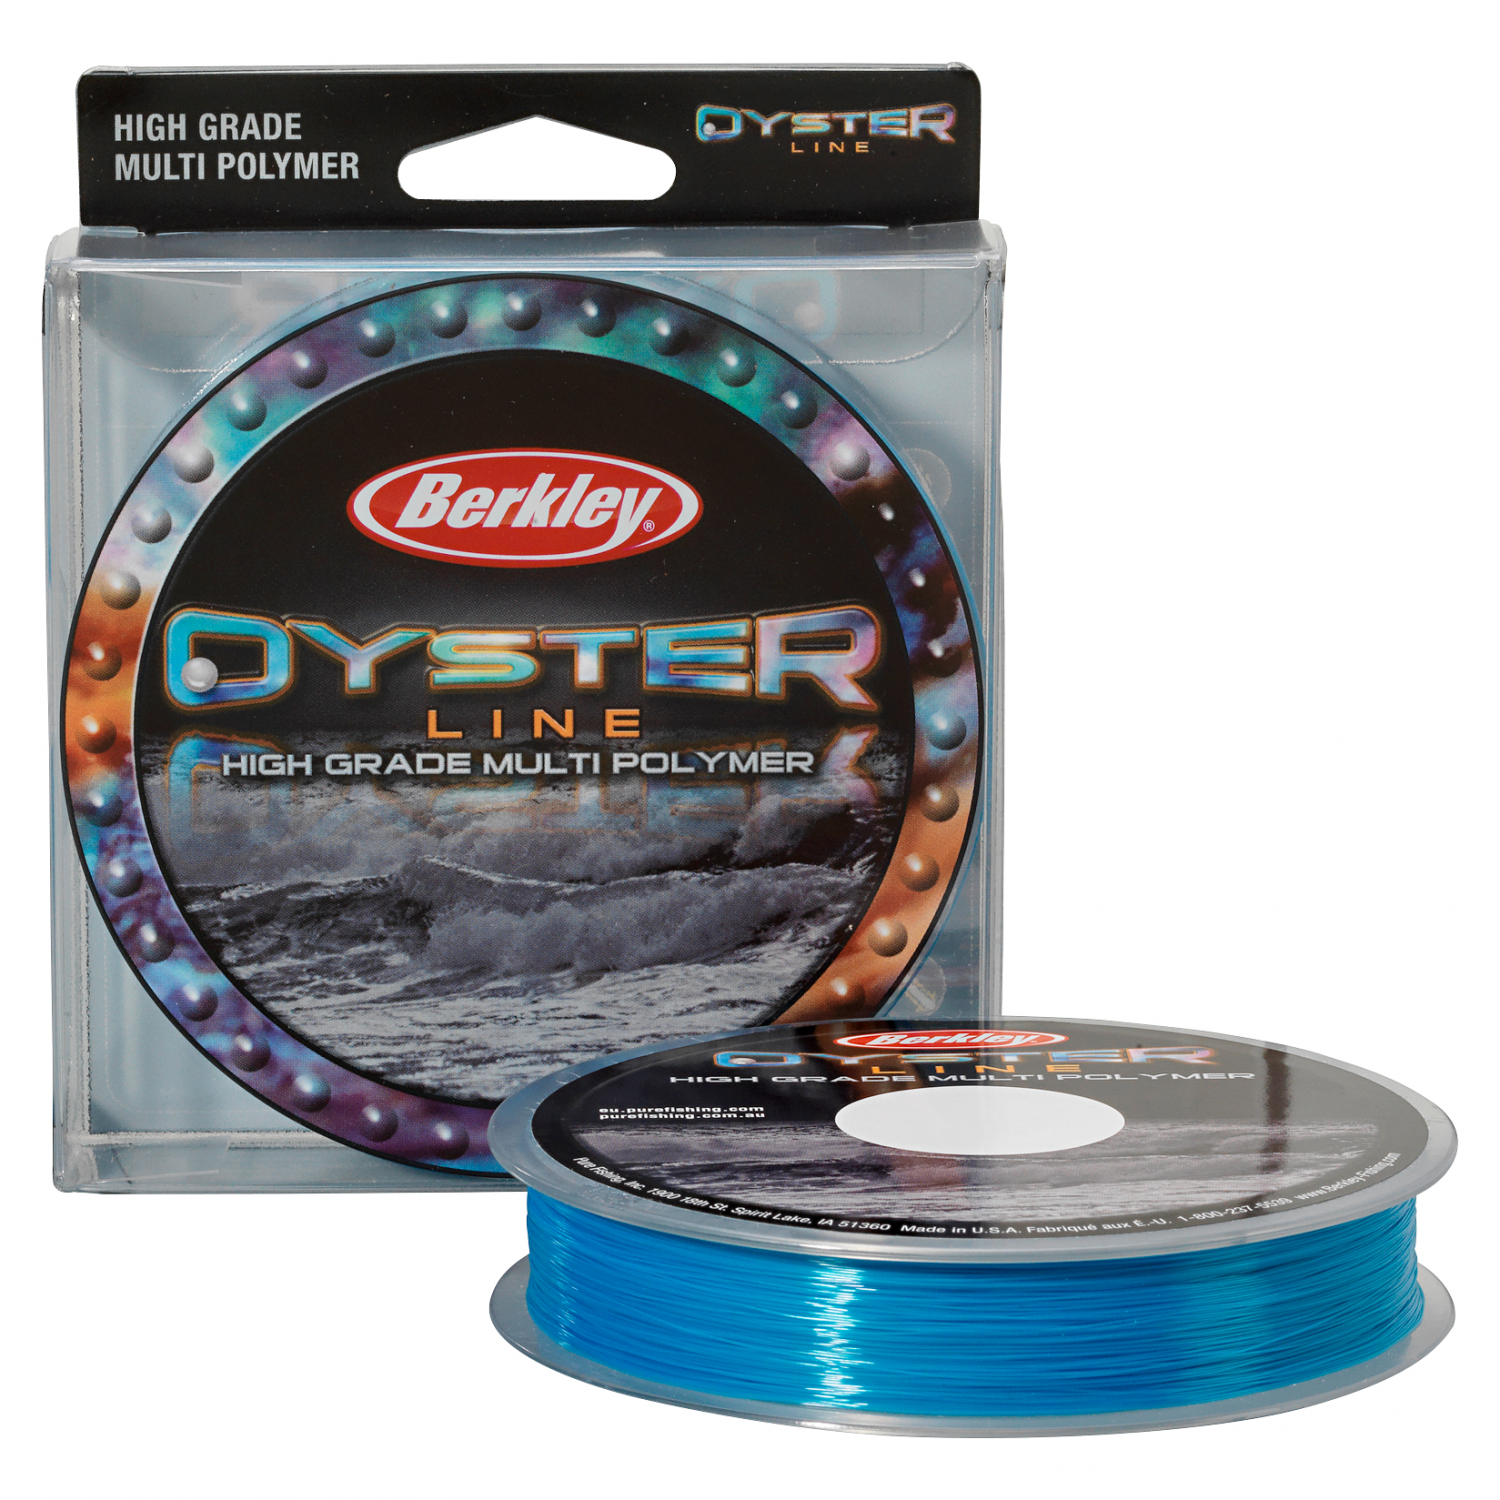 Berkley Fishing Line Oyster (solid blue) at low prices